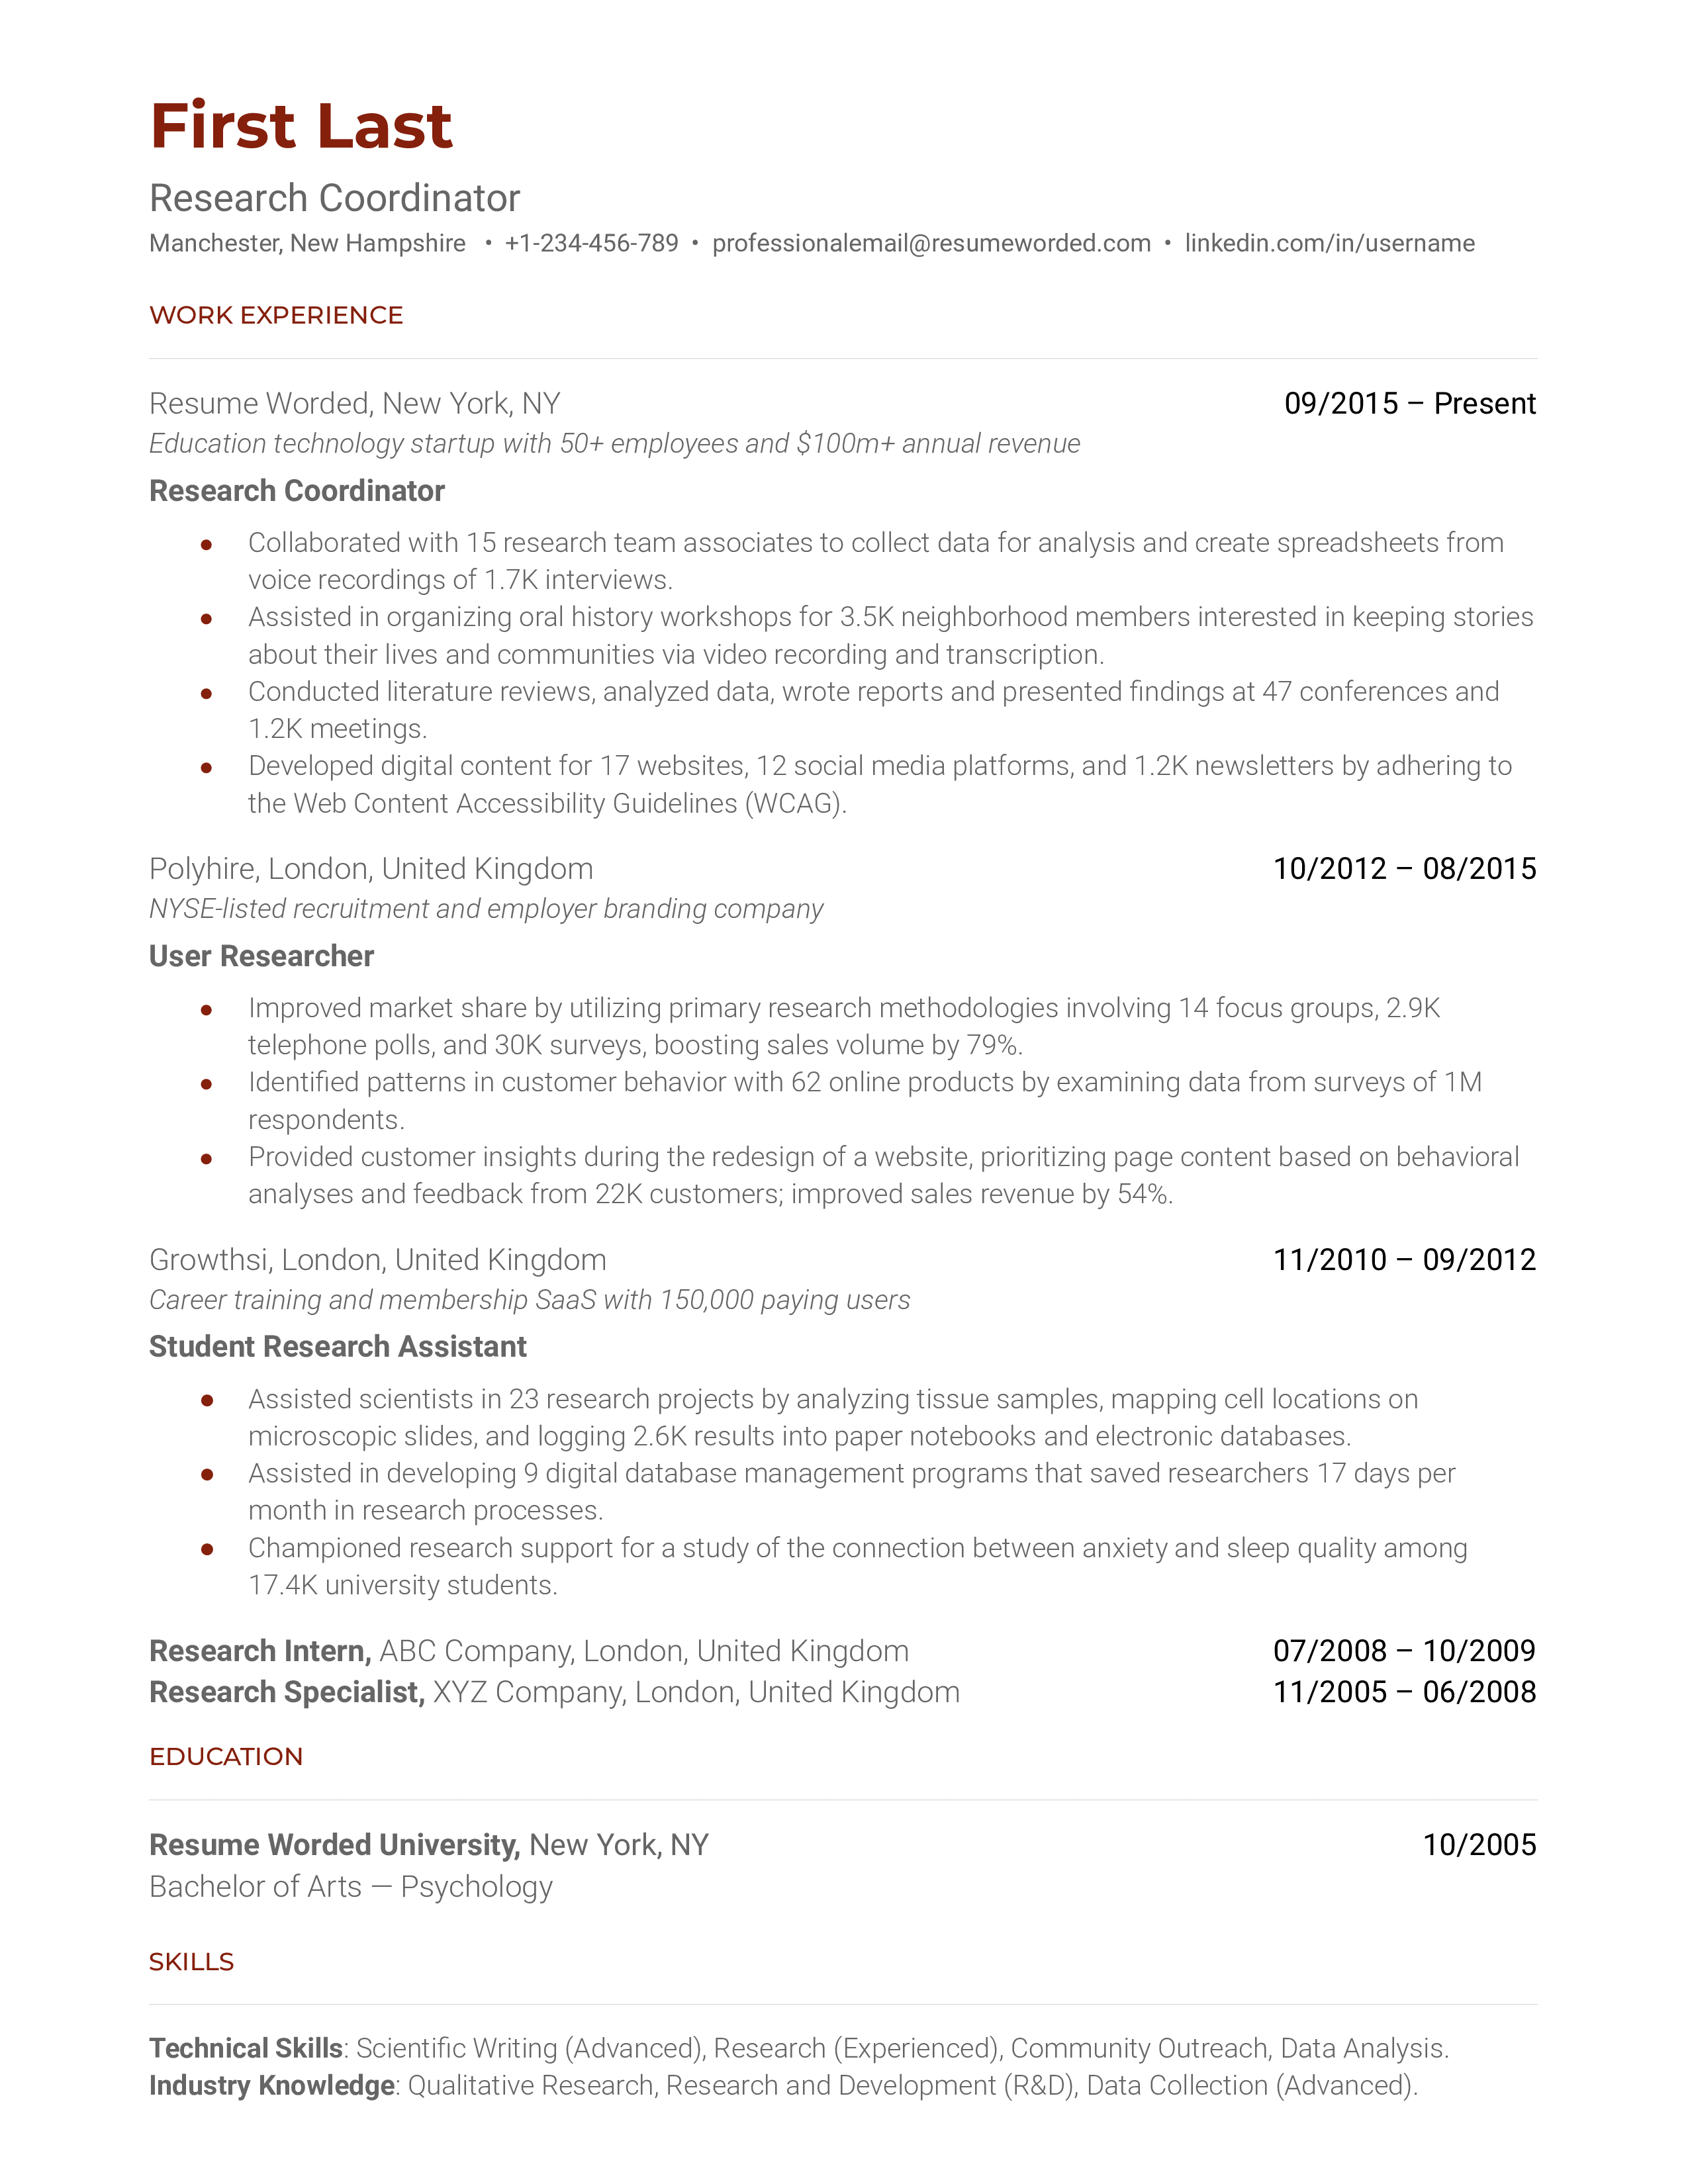 A research coordinator resume sample that highlights the applicant’s experience and skills set.